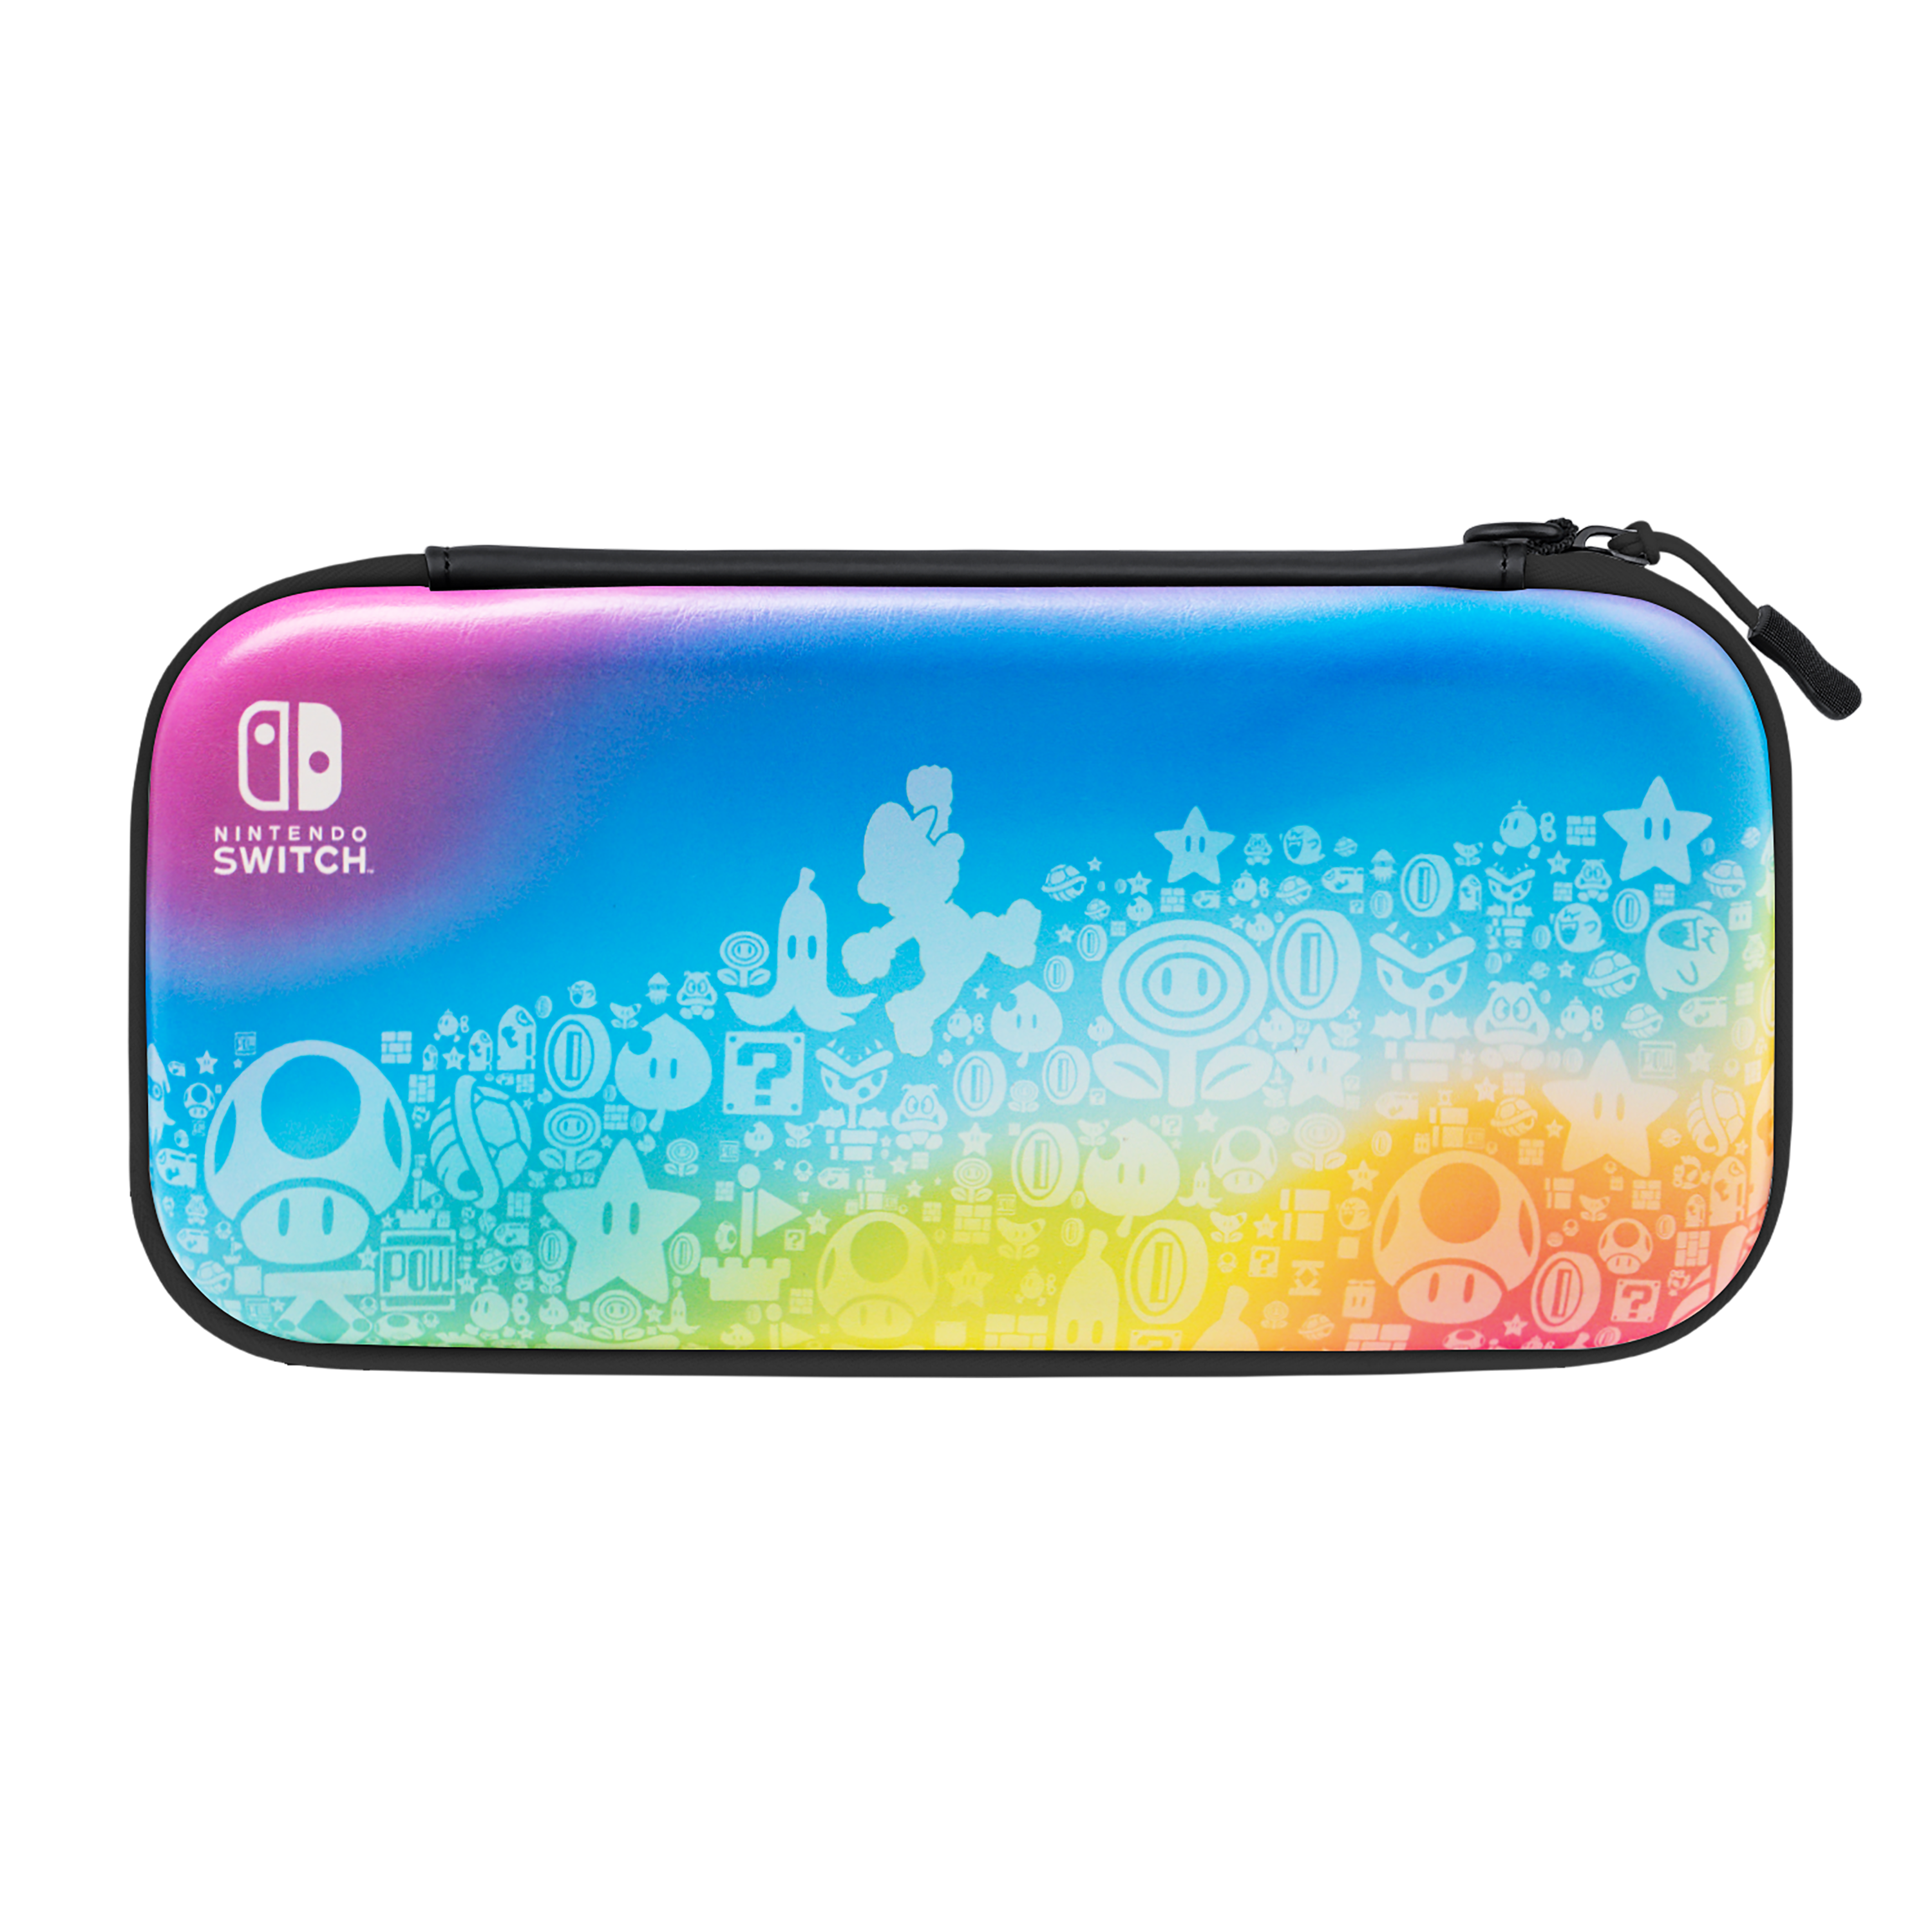 Nintendo Switch Lite with Wonder Game and Accessories - Blue